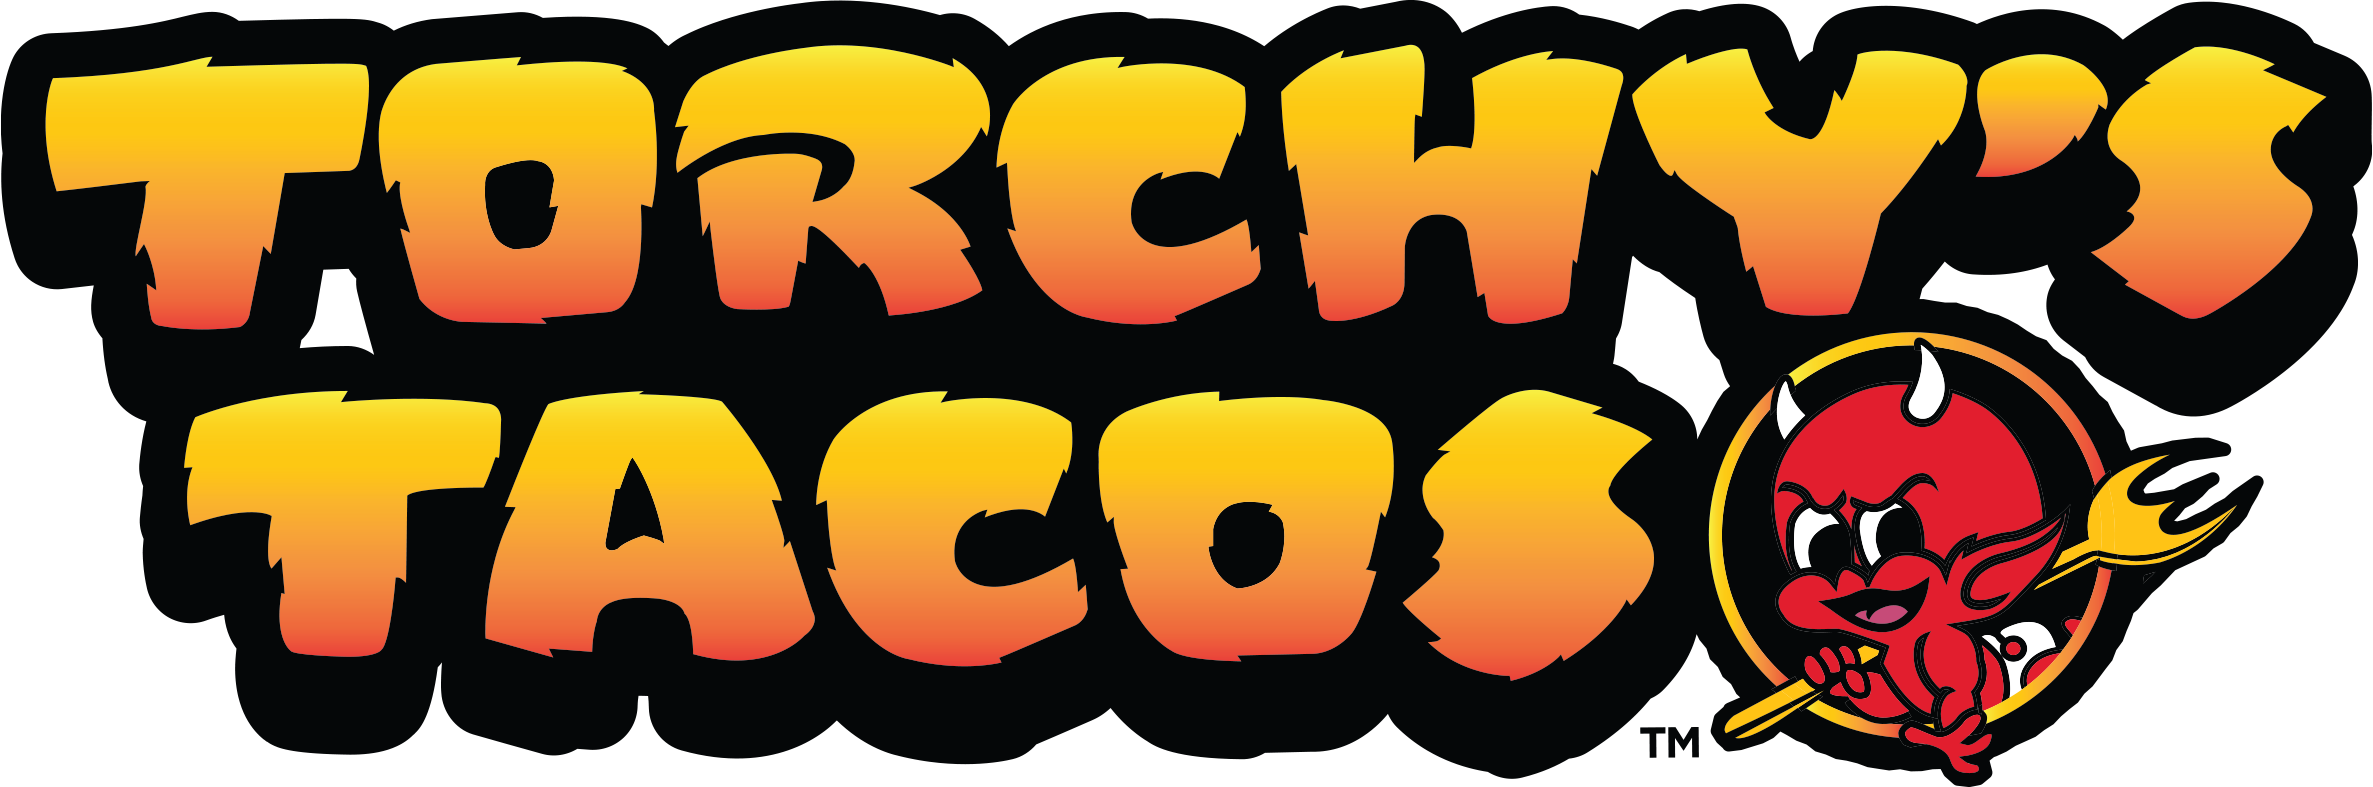 torchy's.png